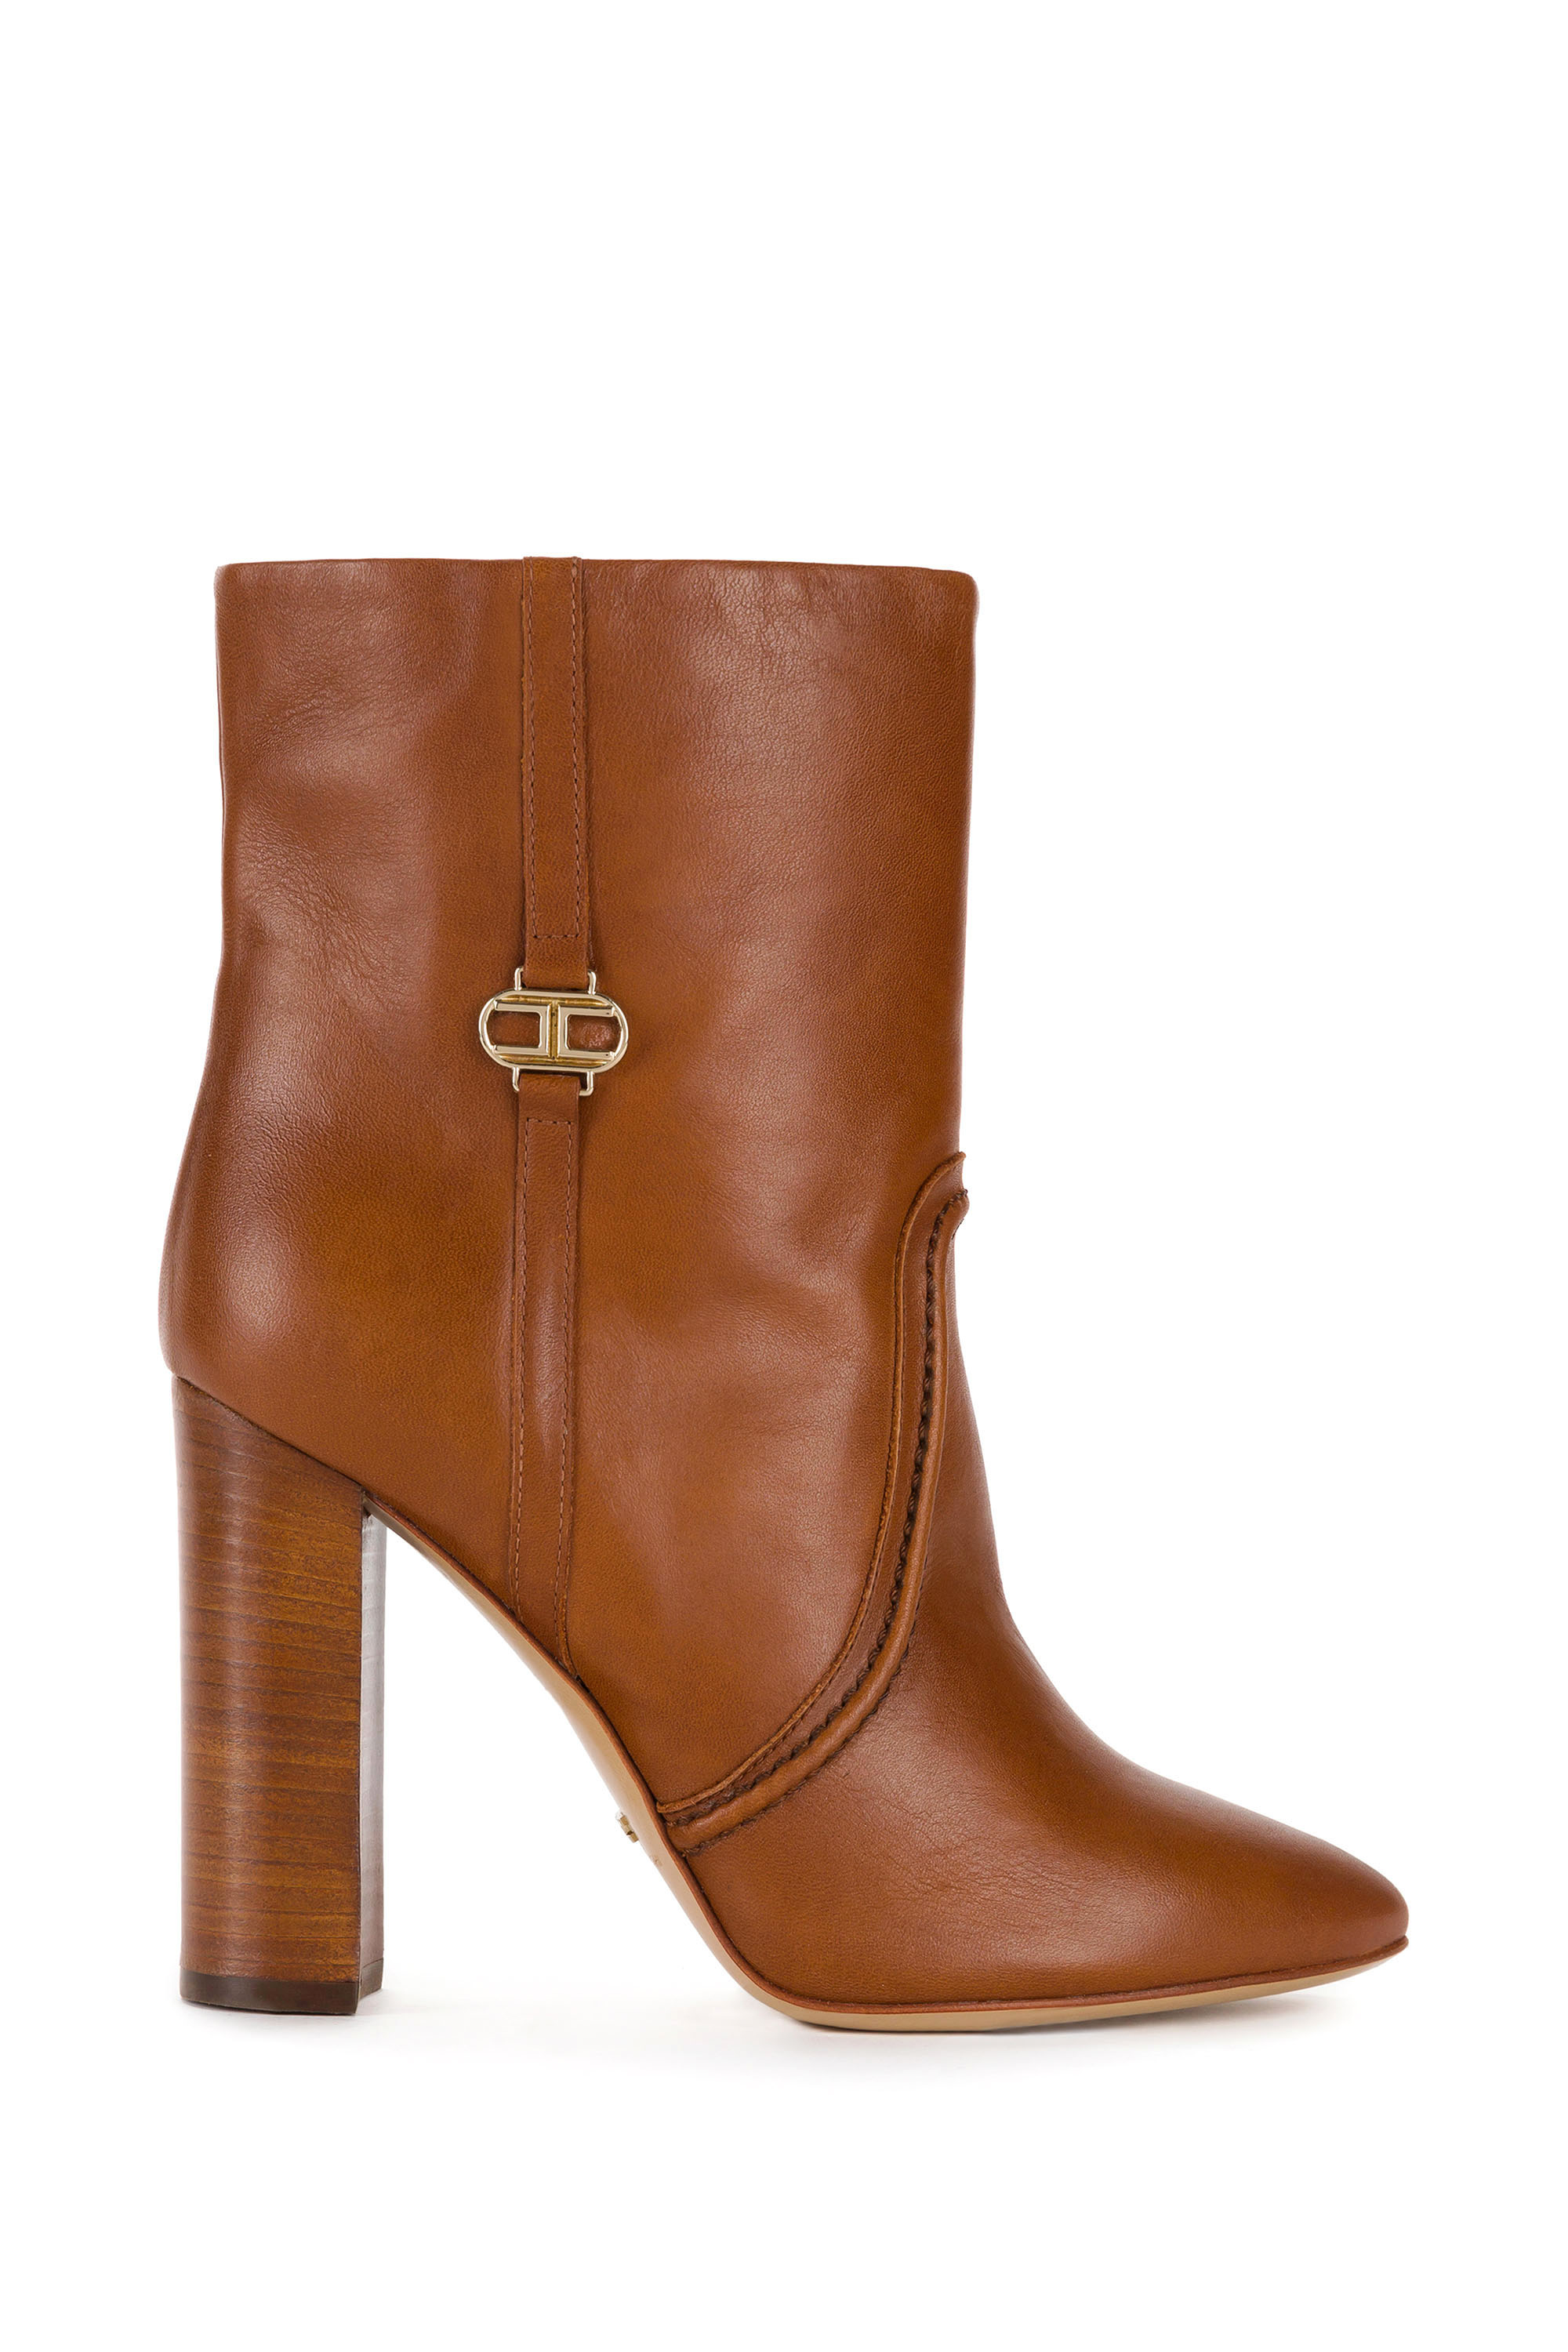 Elisabetta Franchi ankle boots with light gold logo